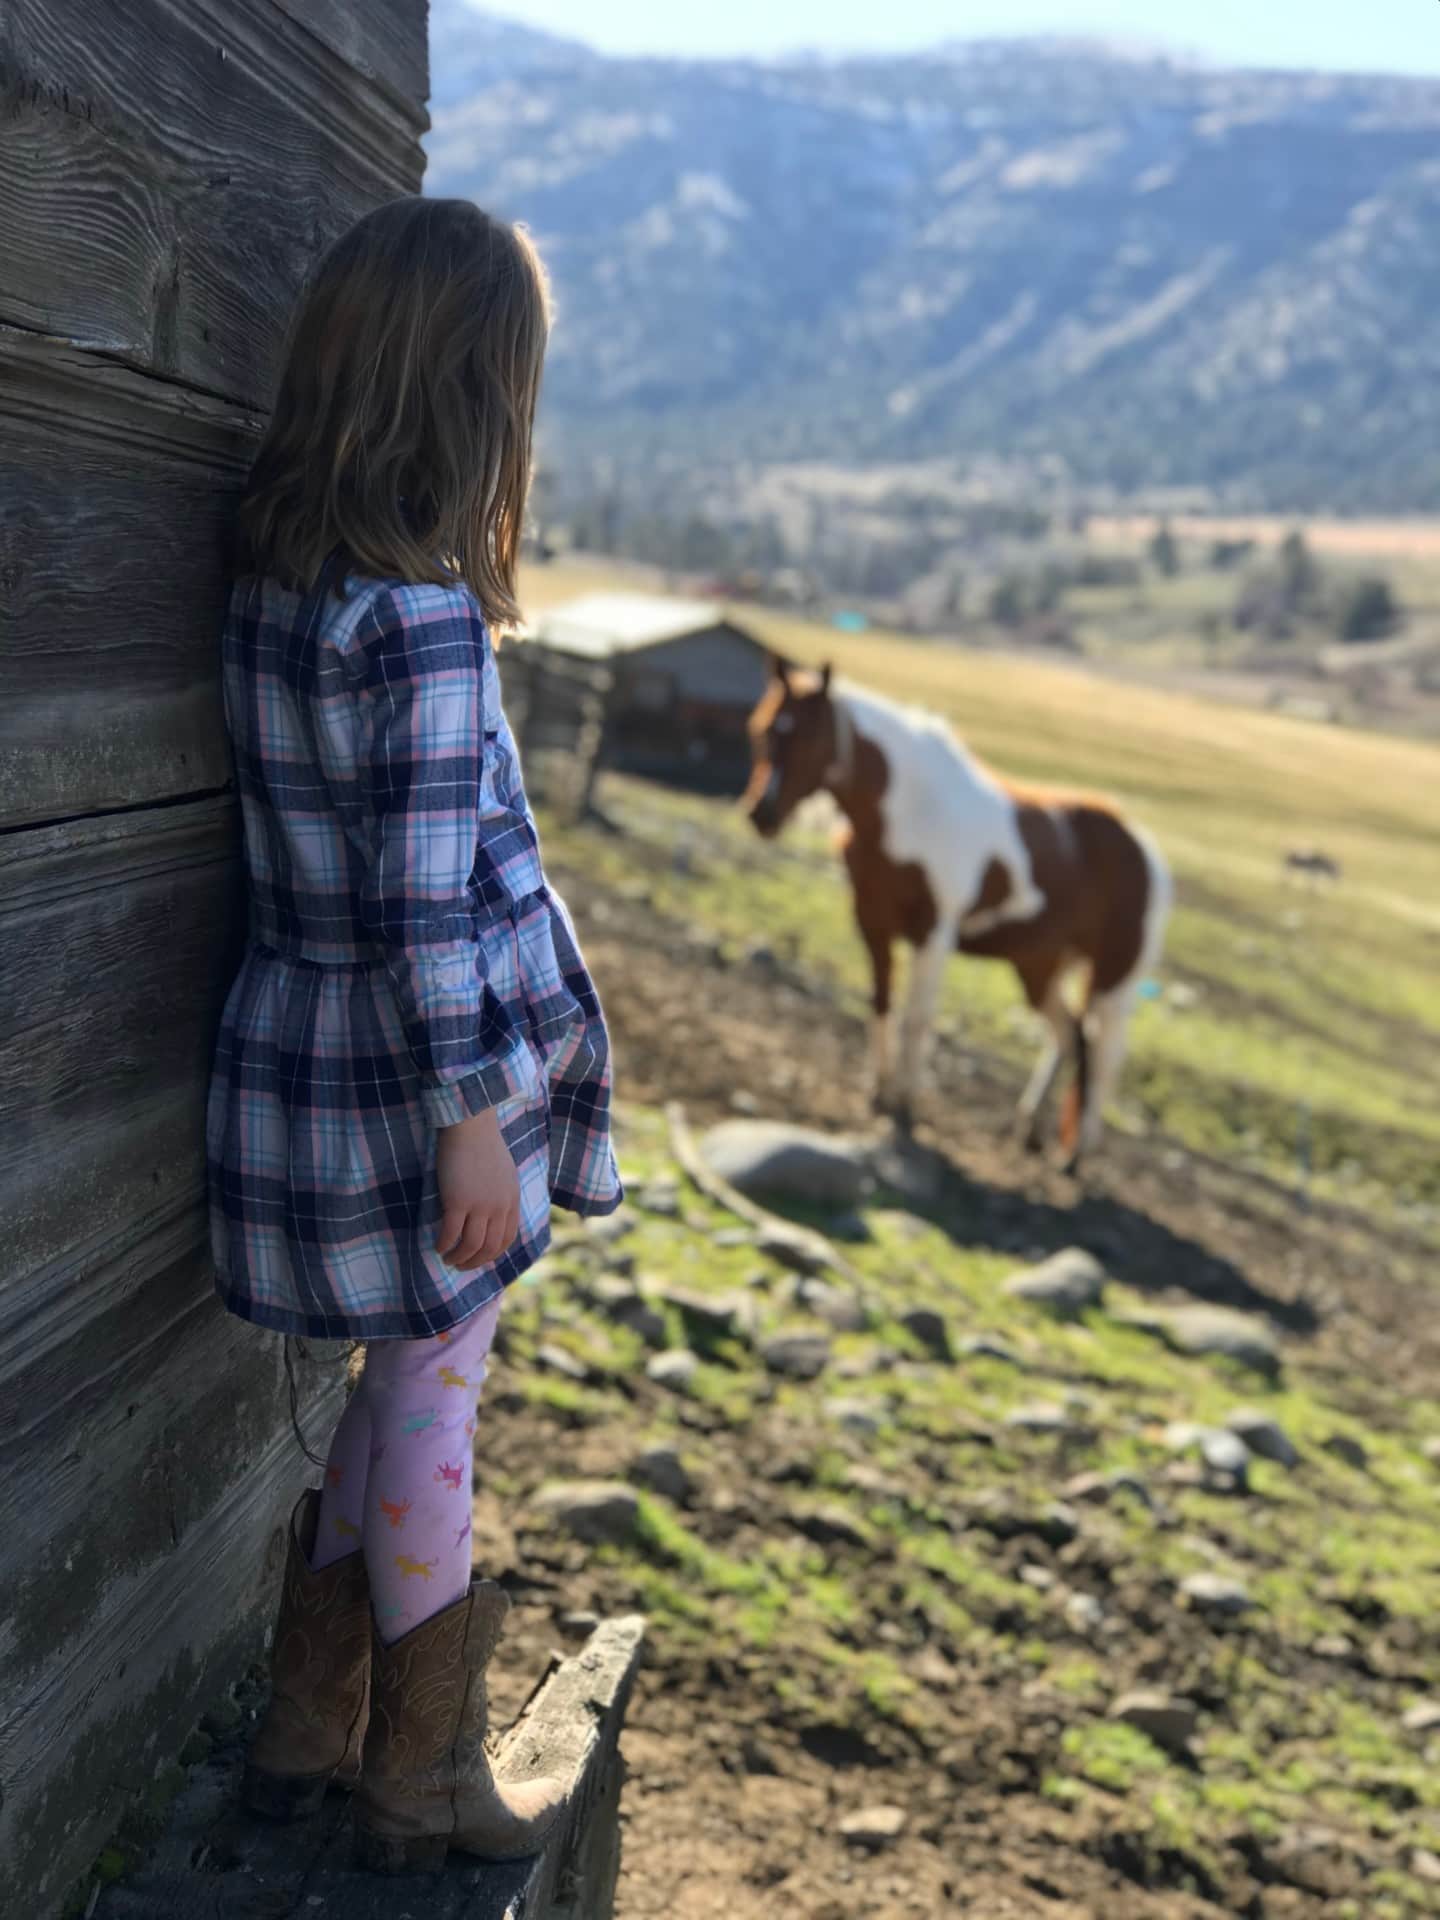 girl and horse oregon campbell crossing ranch north fork john day river